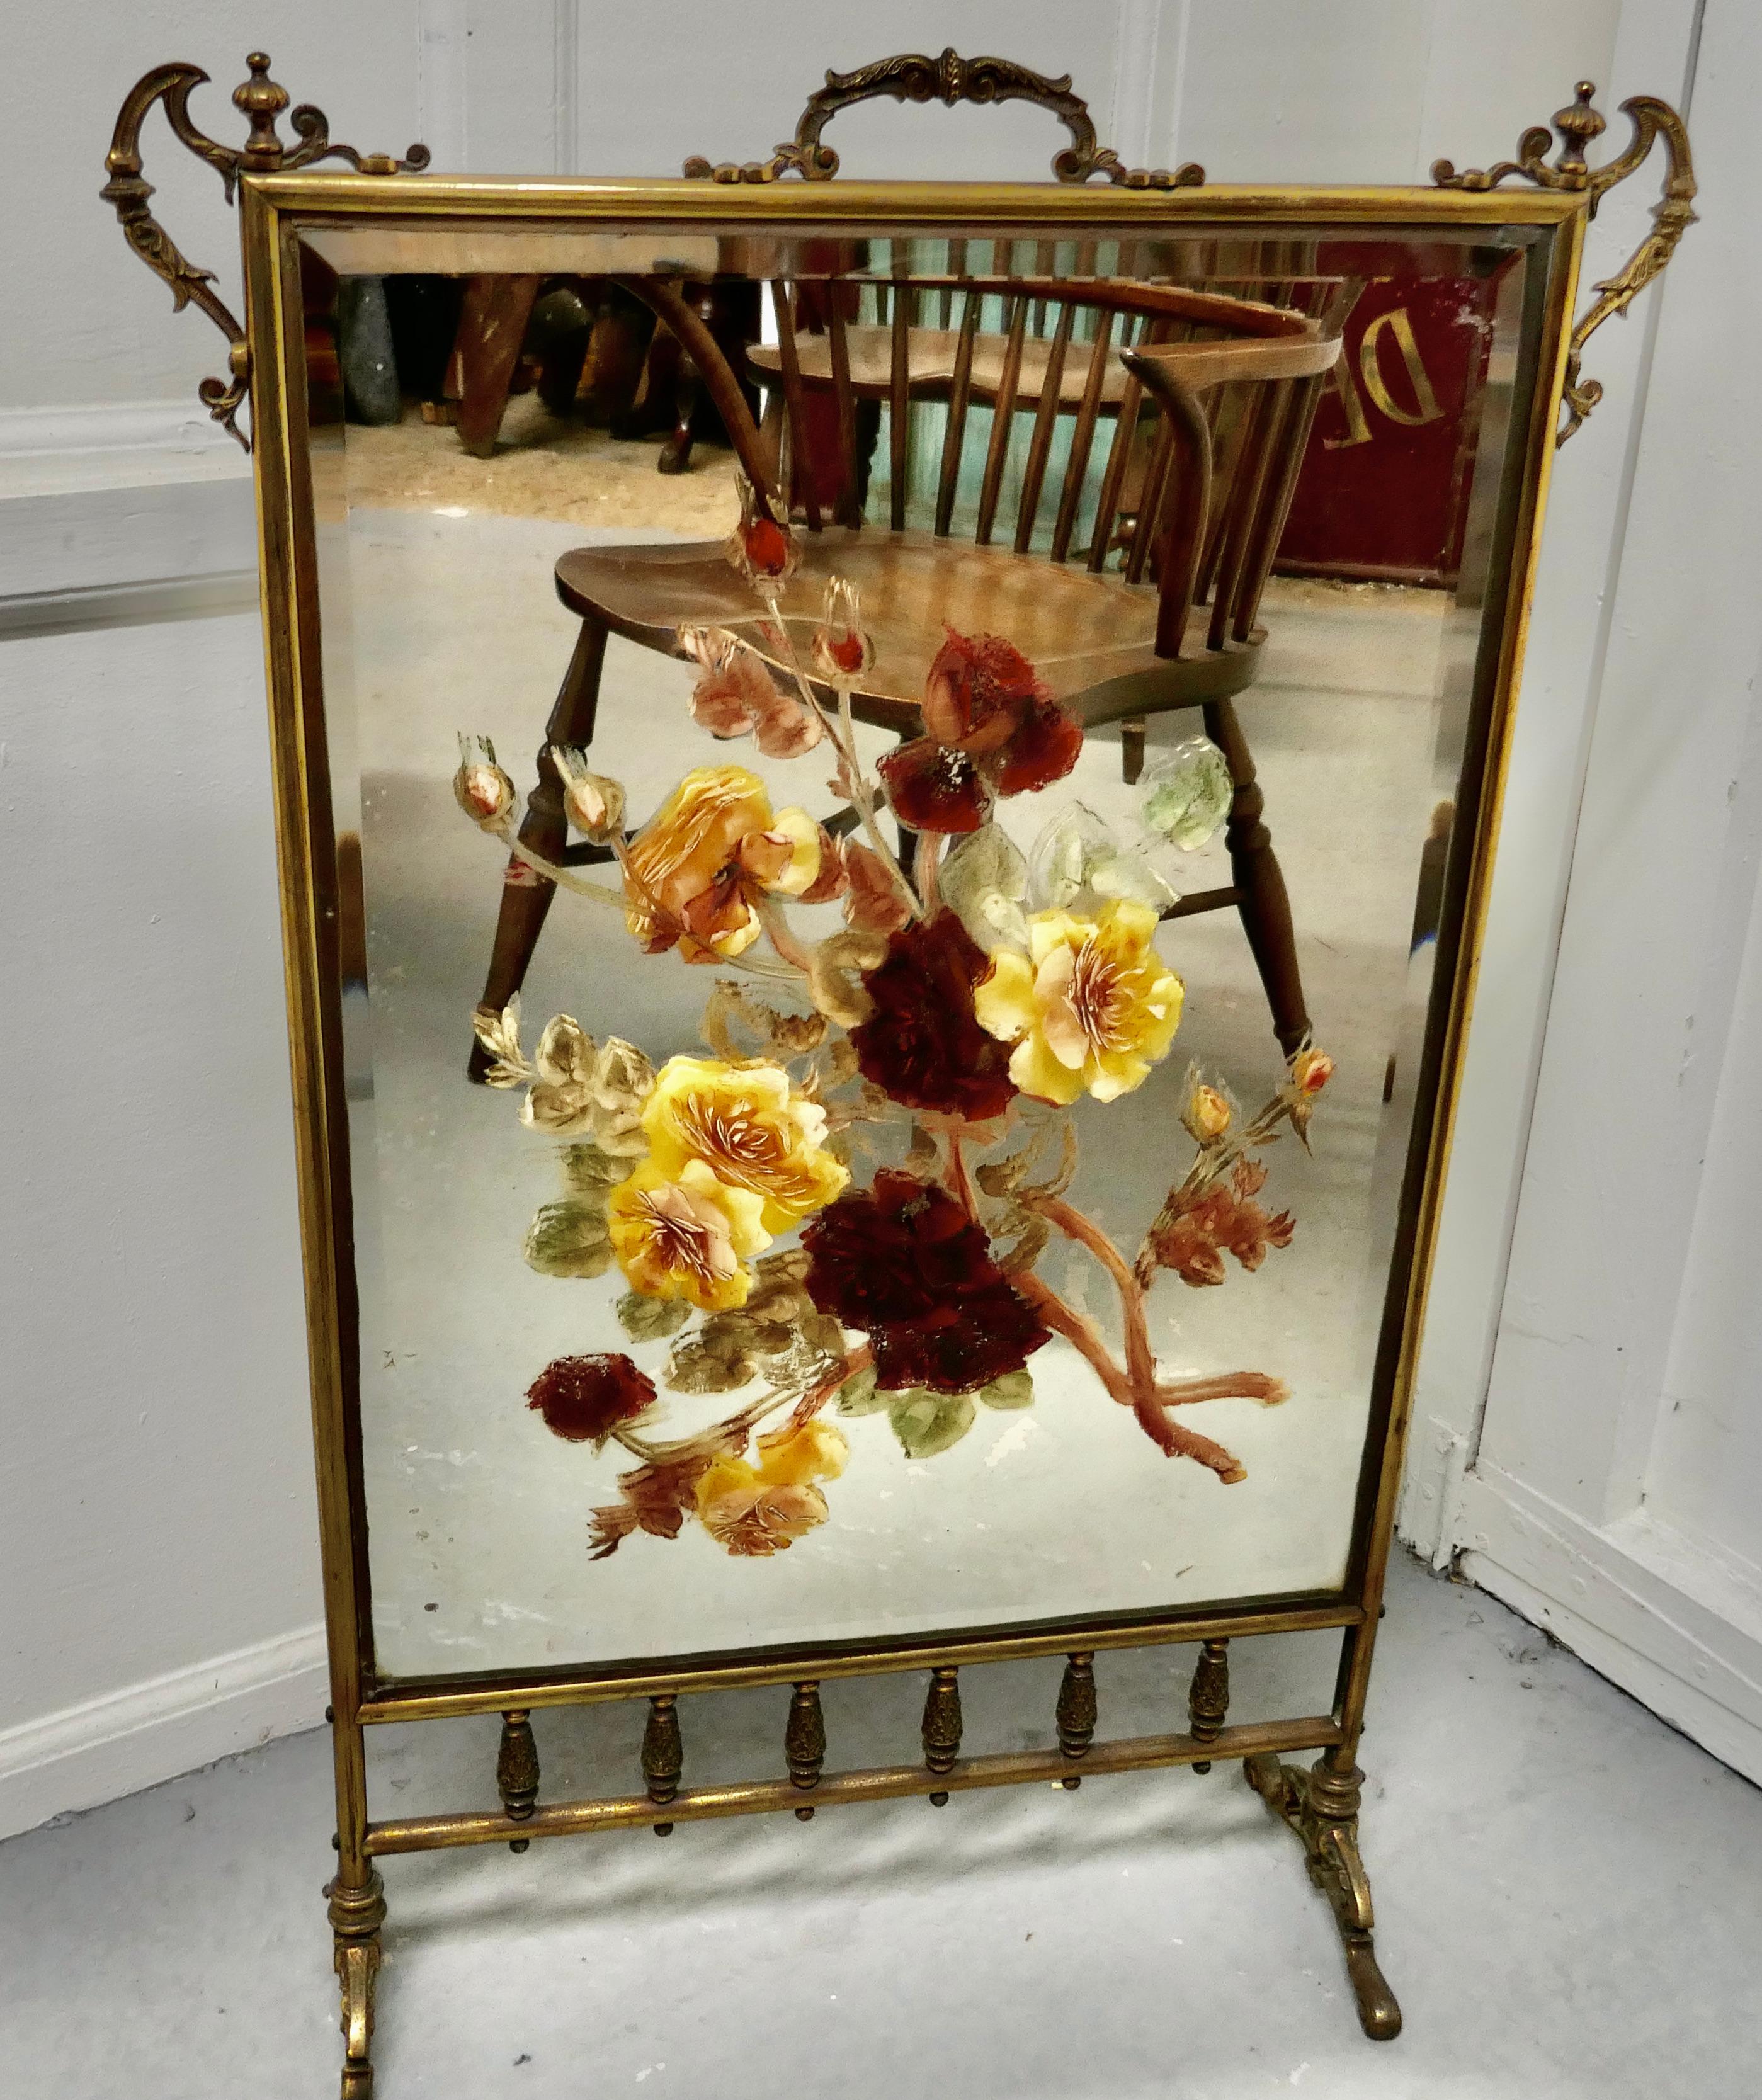 A large Victorian brass and roses painted mirror fire screen

This is a most decorative Fire Screen it has a brass Stand, the Mirror is painted with large colourful Roses.
The screen is in good sound condition, and a very attractive piece if